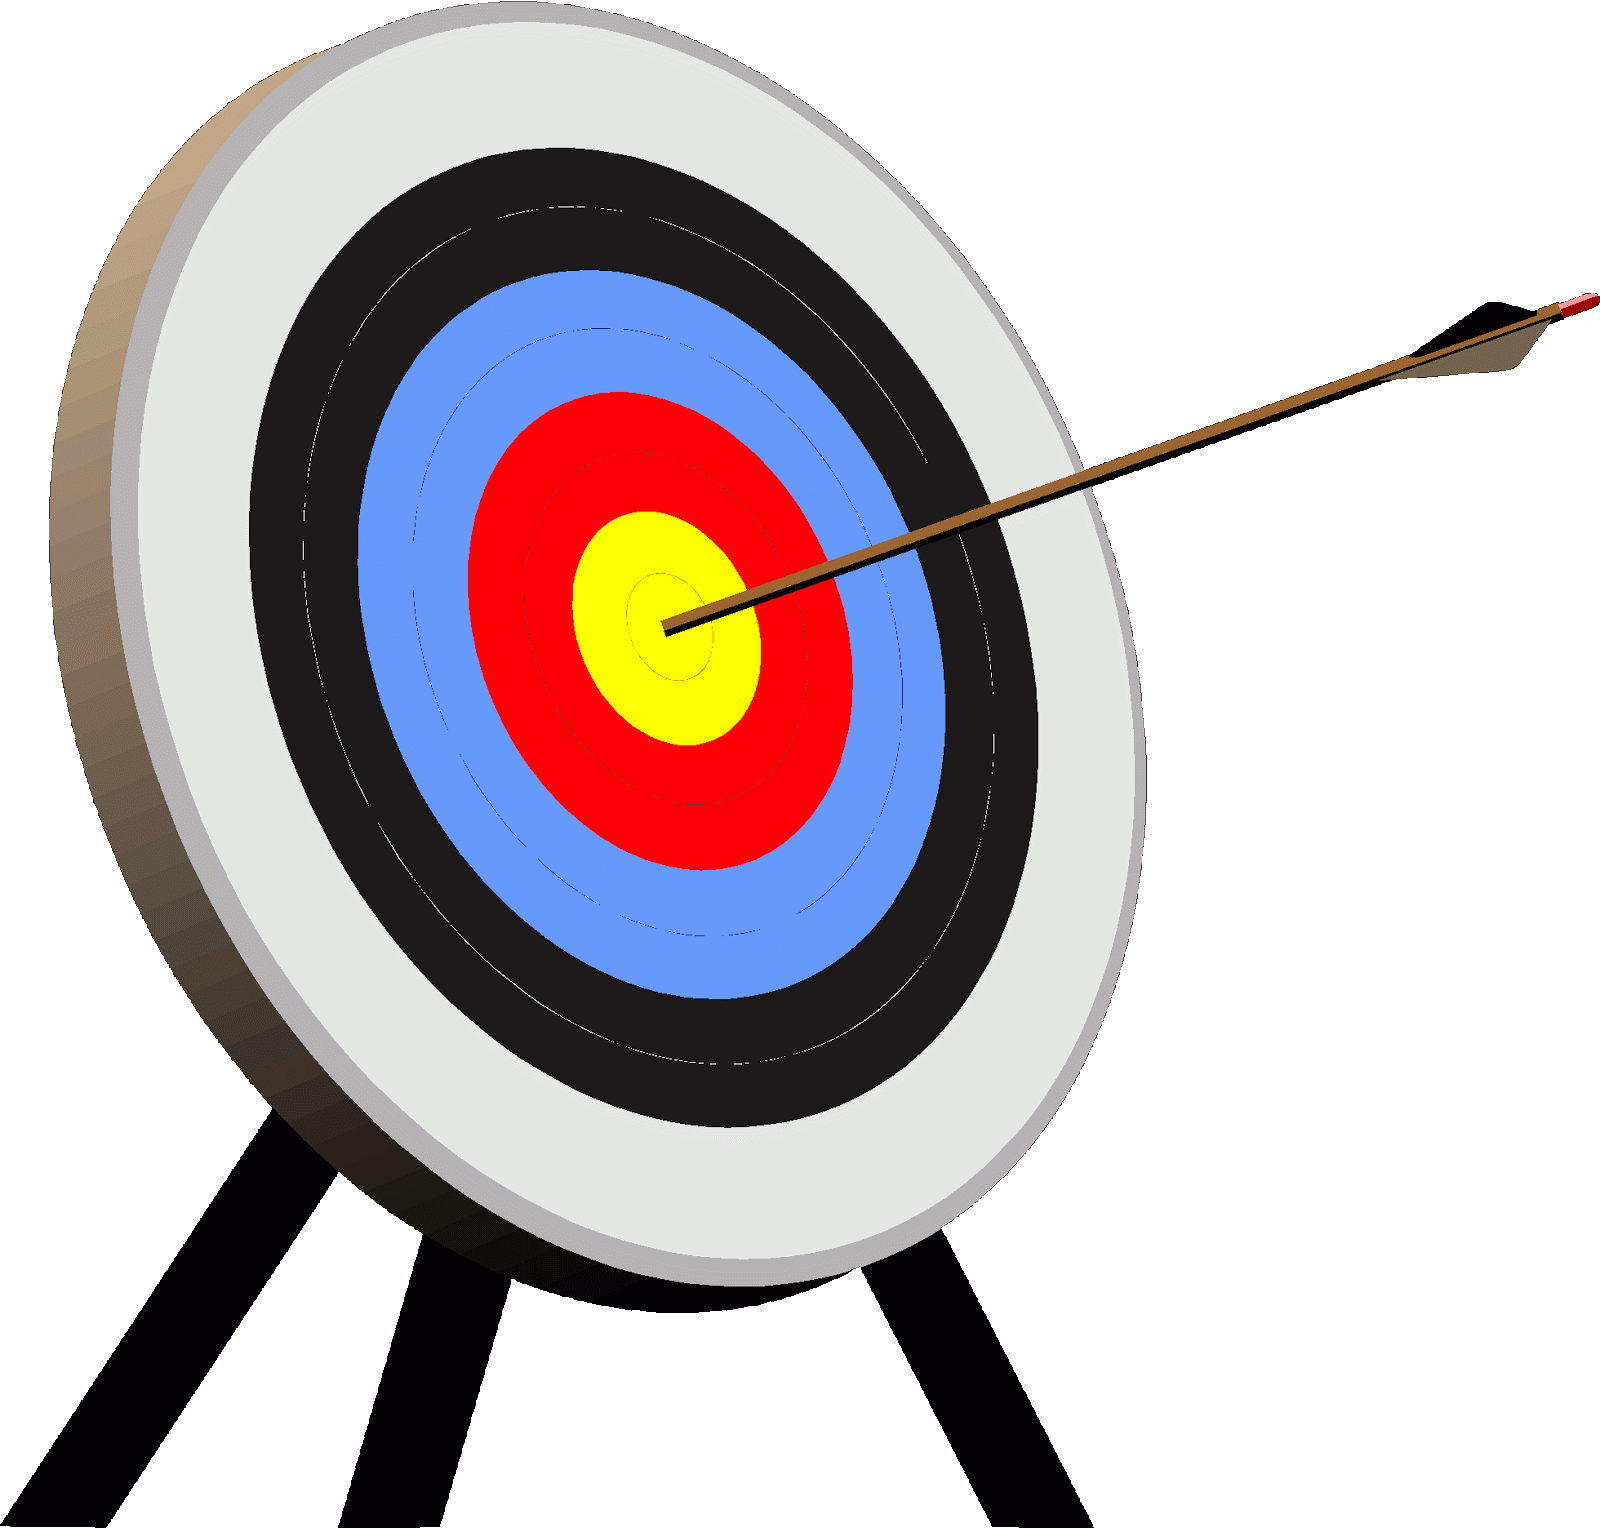 Archery clipart olympic archery. Live stream event with